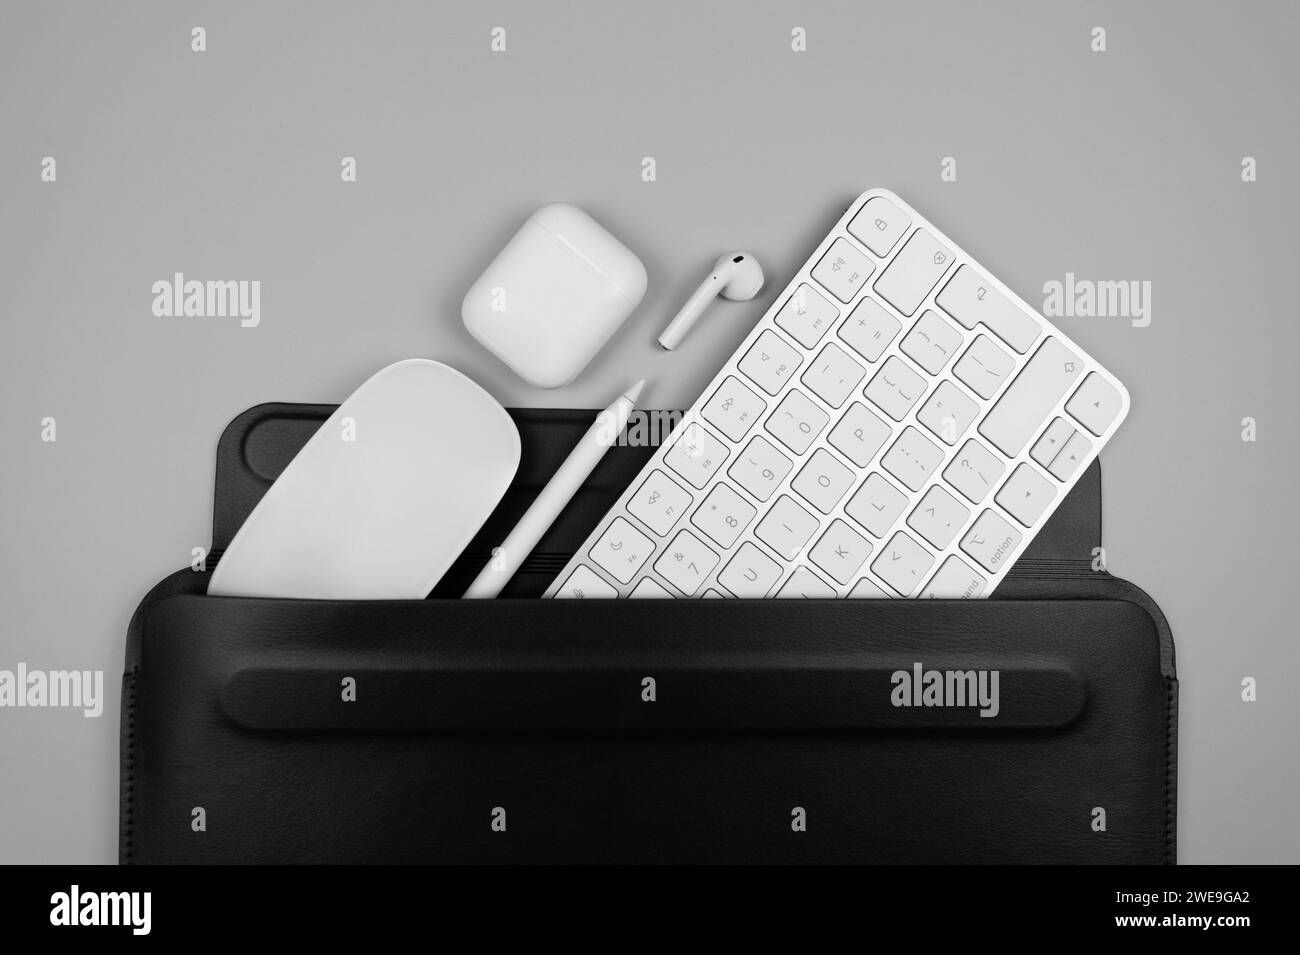 Top view of white keyboard, mouse, earphones case and pen on light grey background. Black laptop computer case flat lay, copy space. Stock Photo